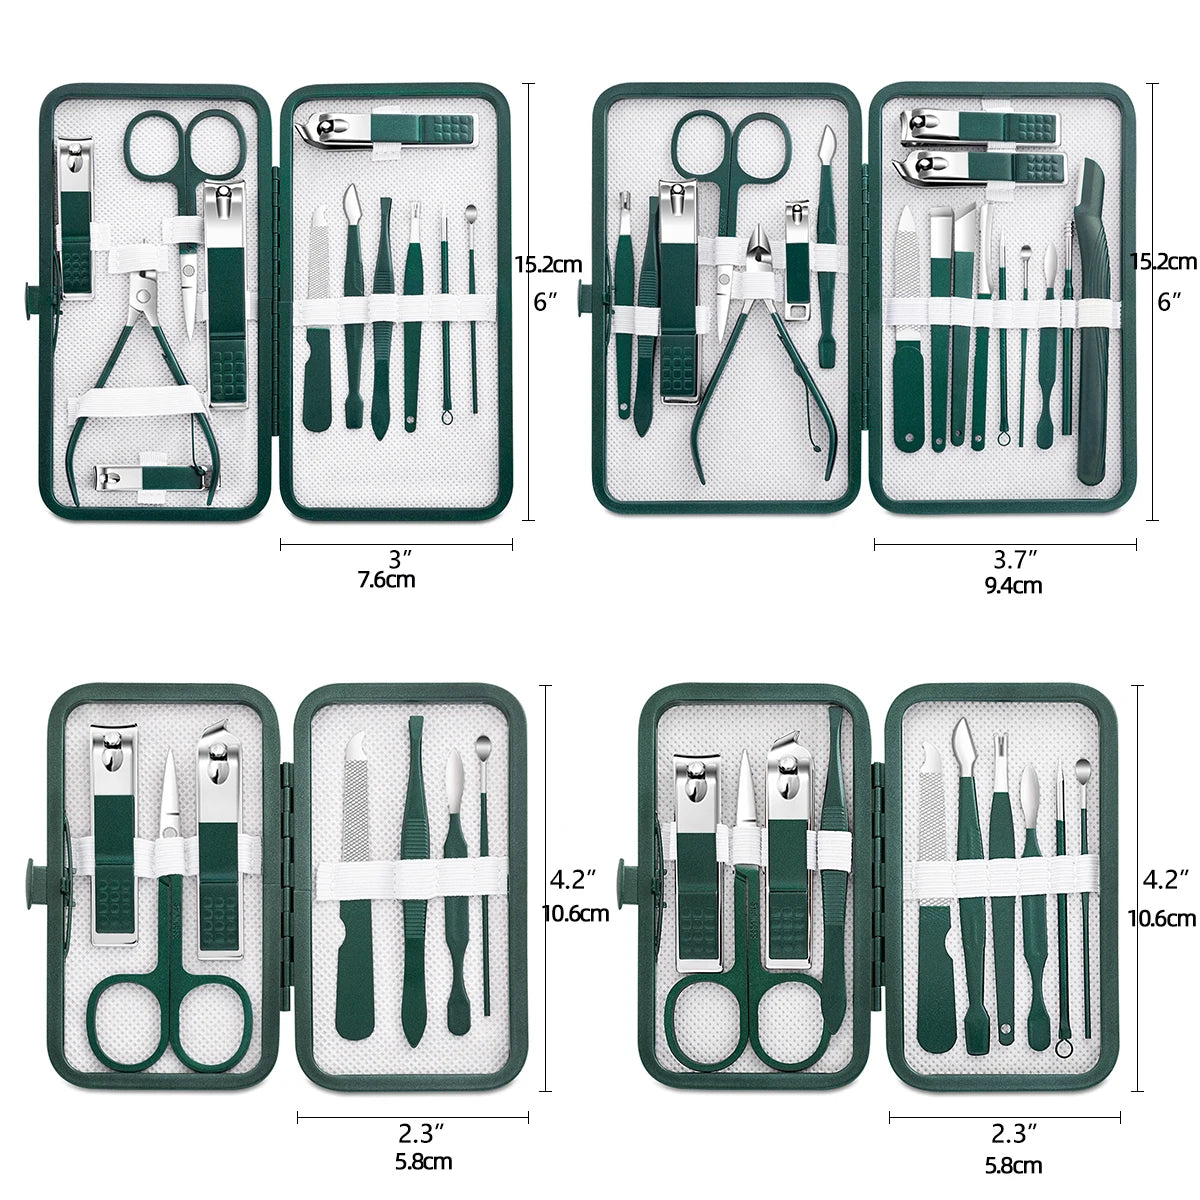 Stainless Steel Manicure Kit: Professional Grooming Set for Nails